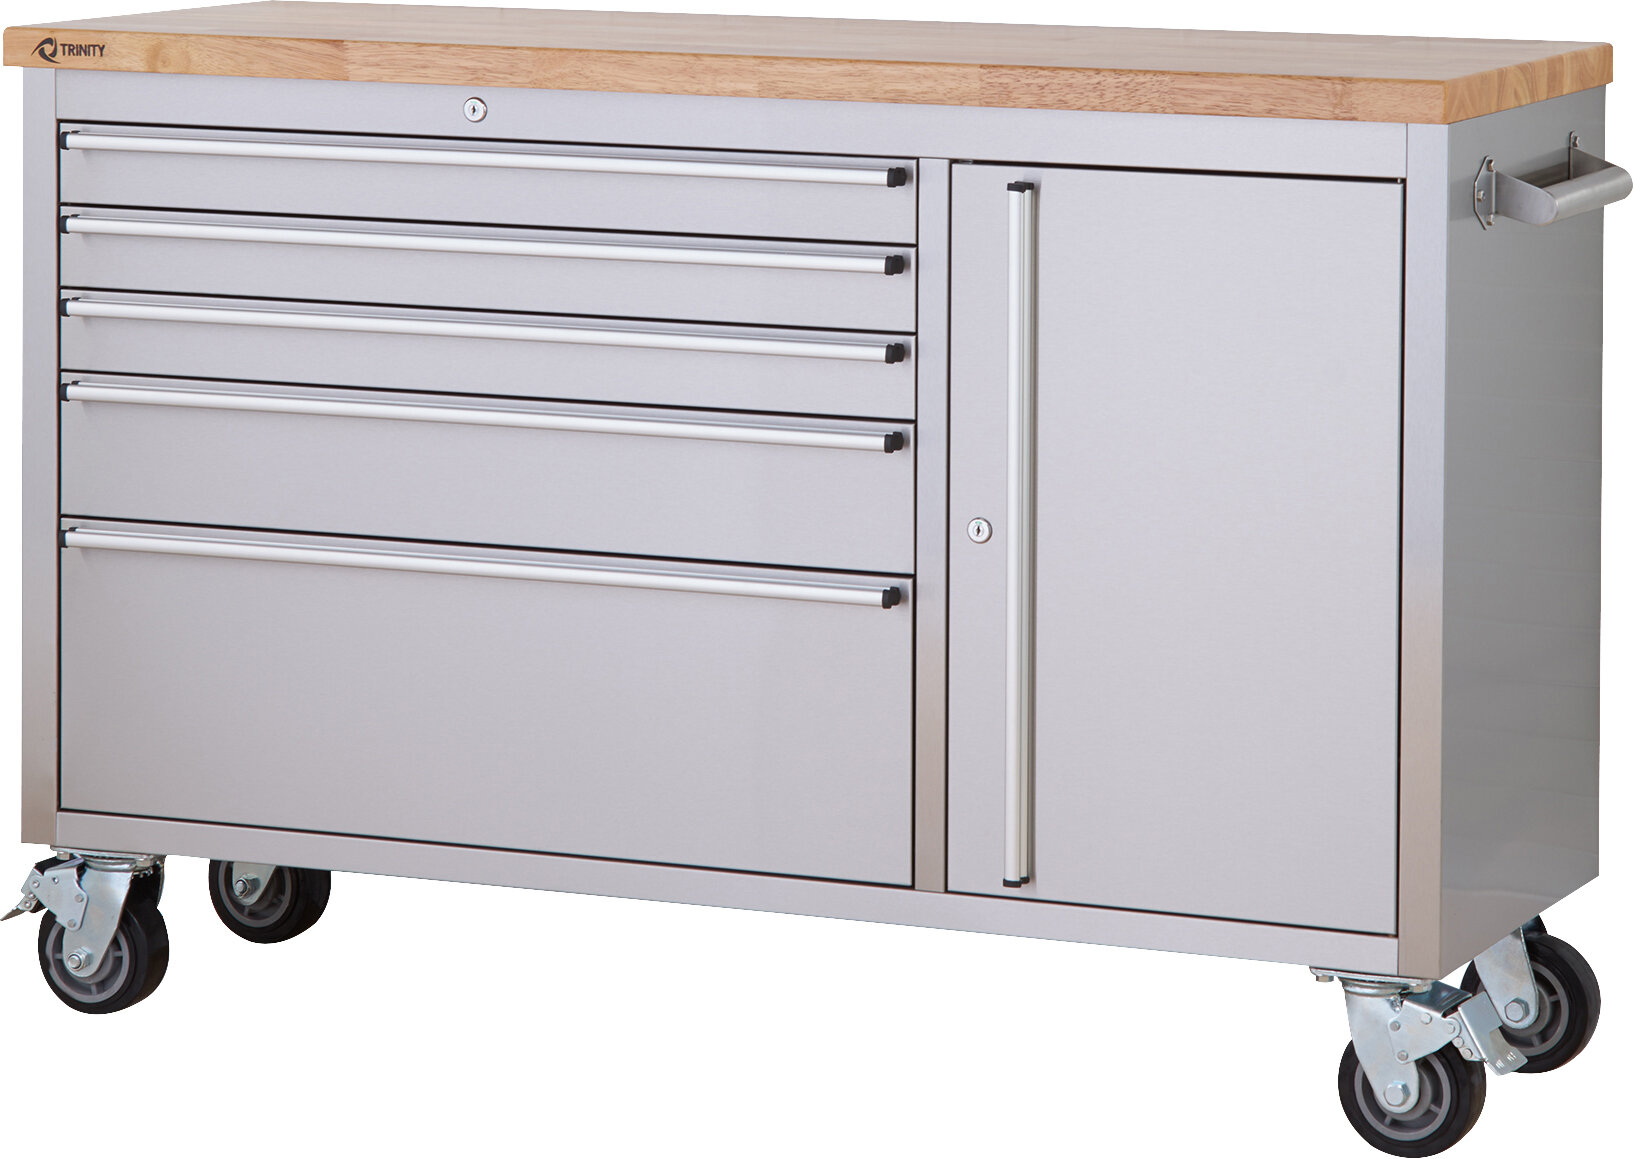 By Product - Tool Storage + Workbenches - TRINITY